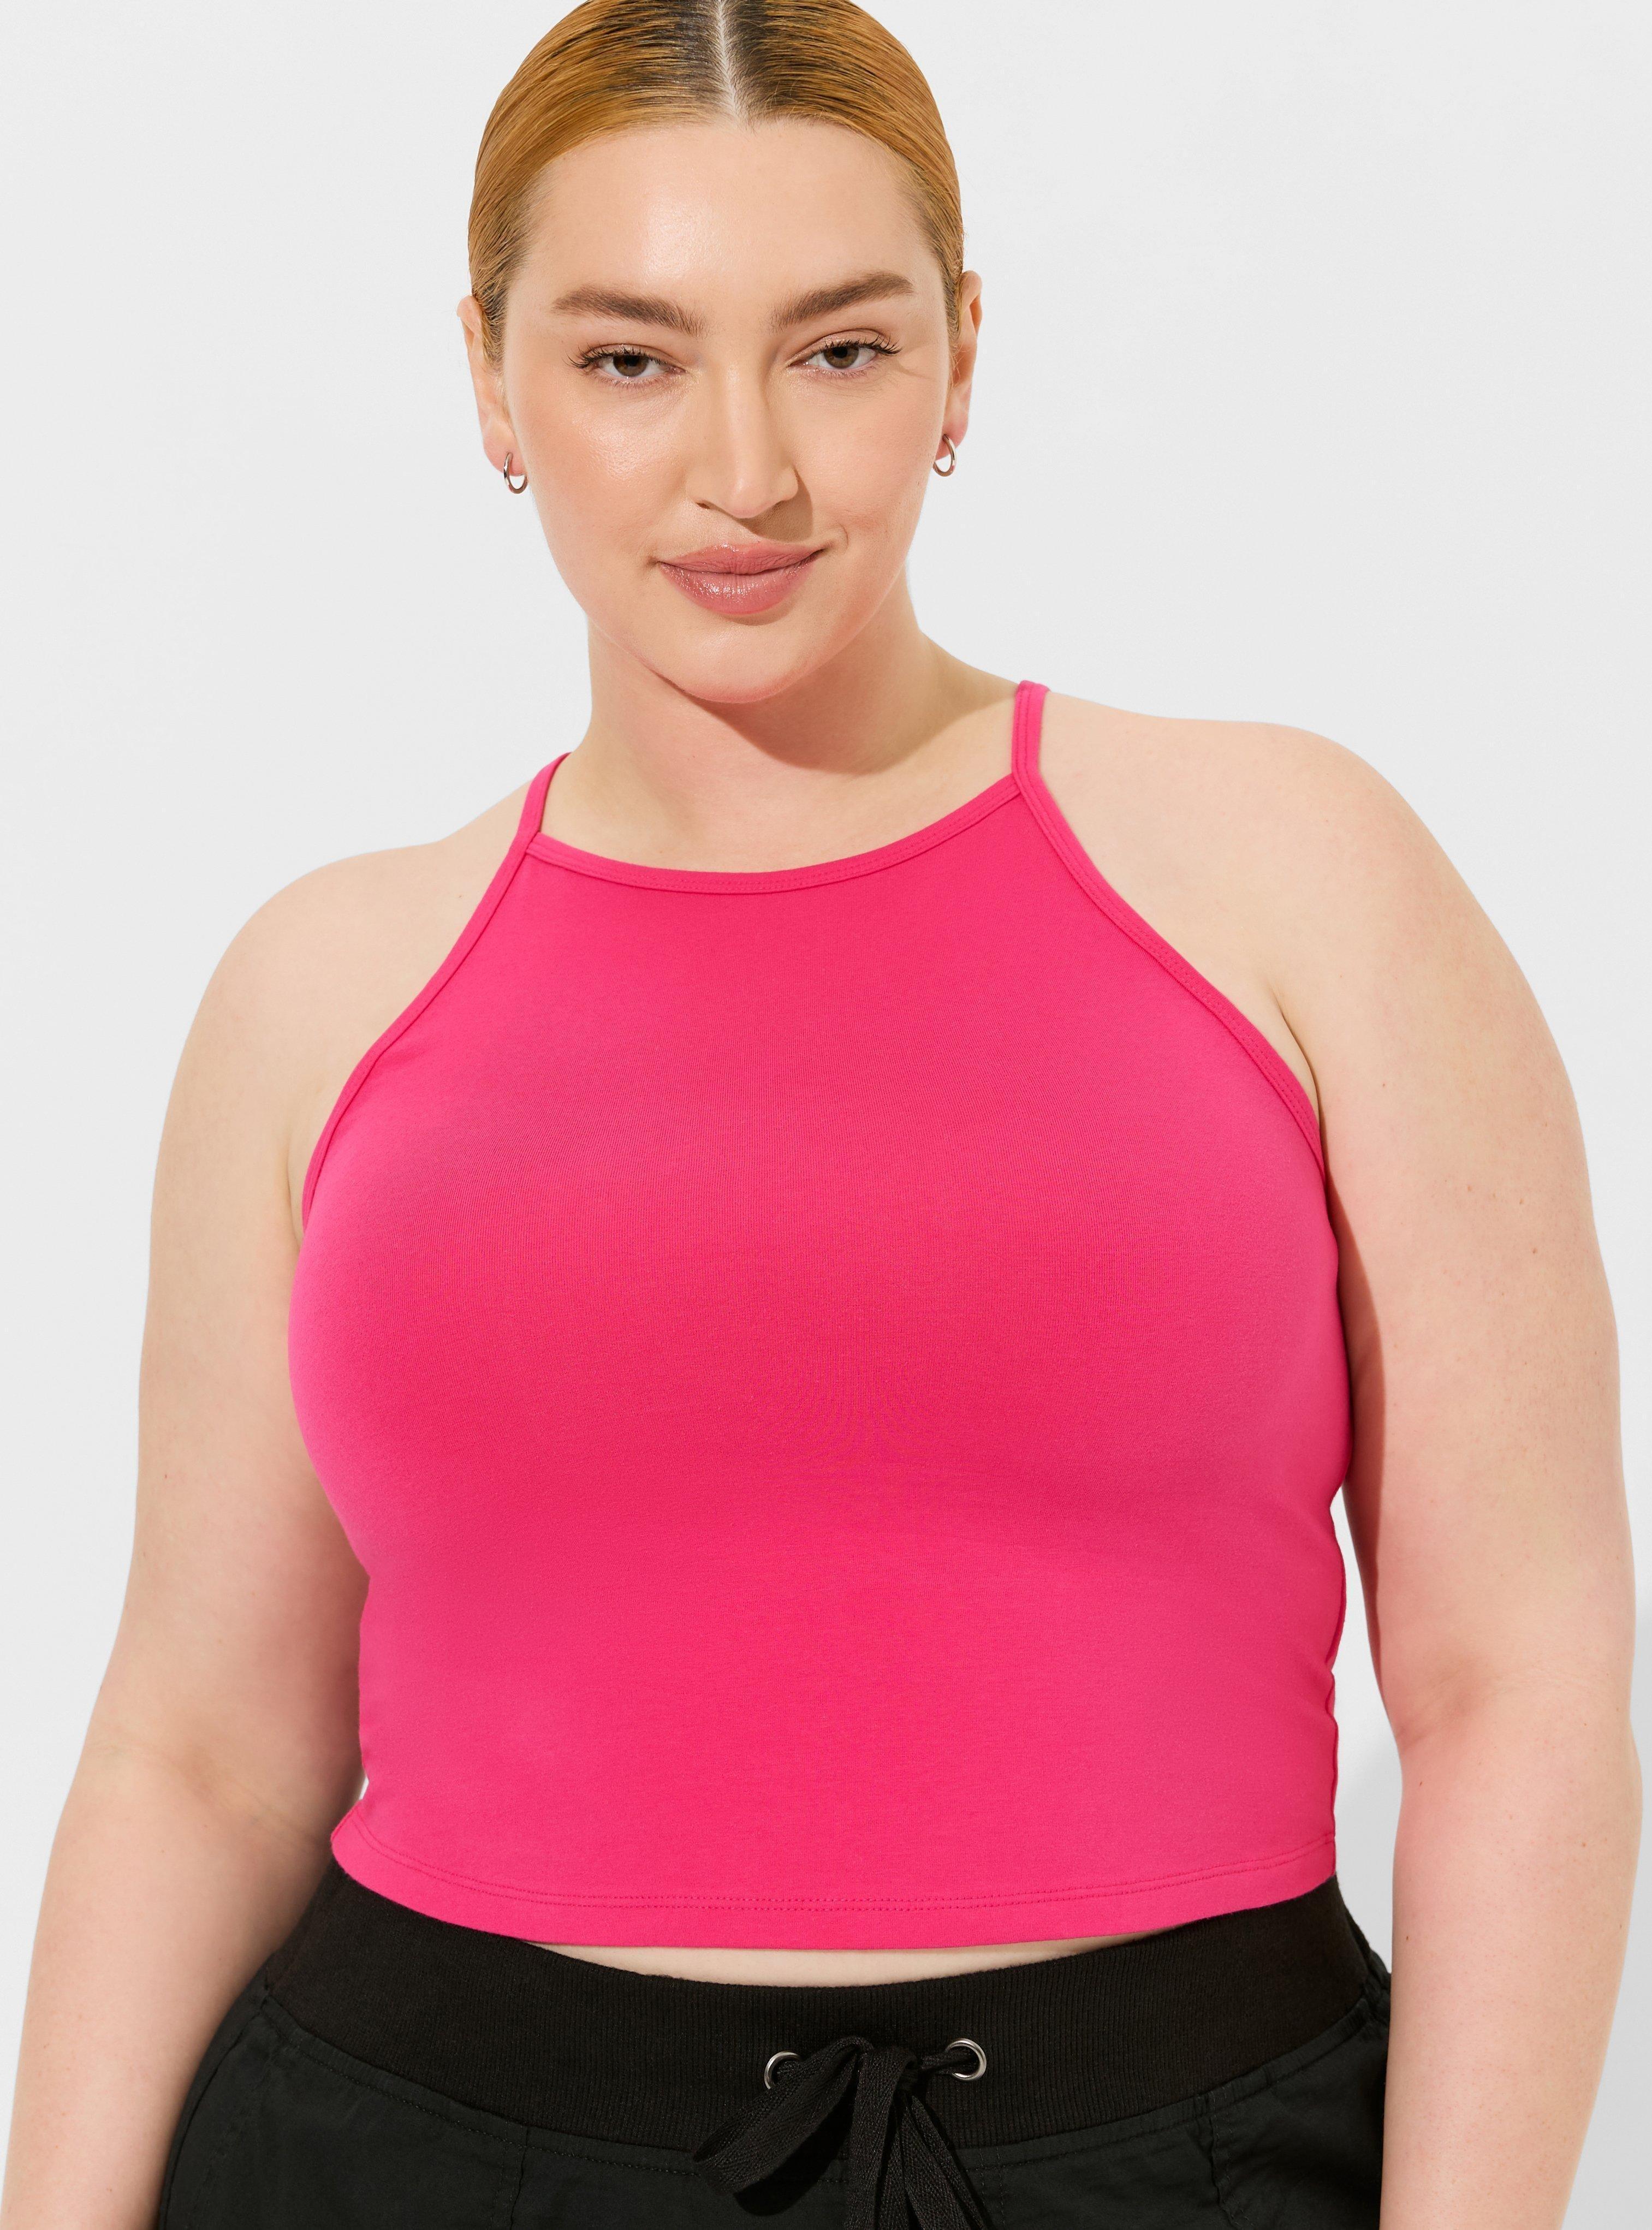 Slim Fit Body Shaper Peacock Breast Support Double Side Bra - Pink